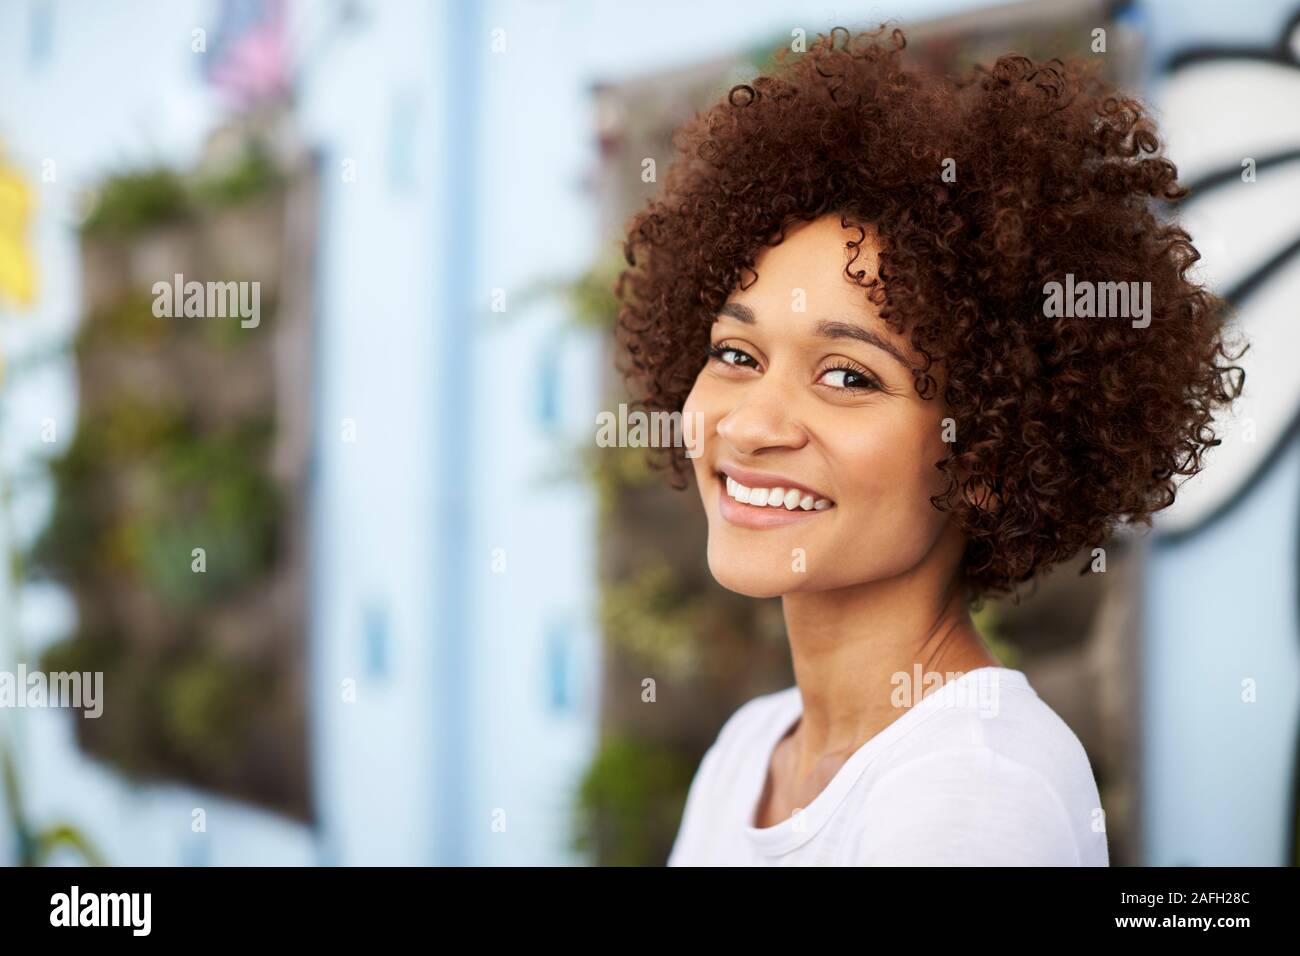 Outdoor Head And Shoulders Portrait Of Smiling Young Woman Stock Photo